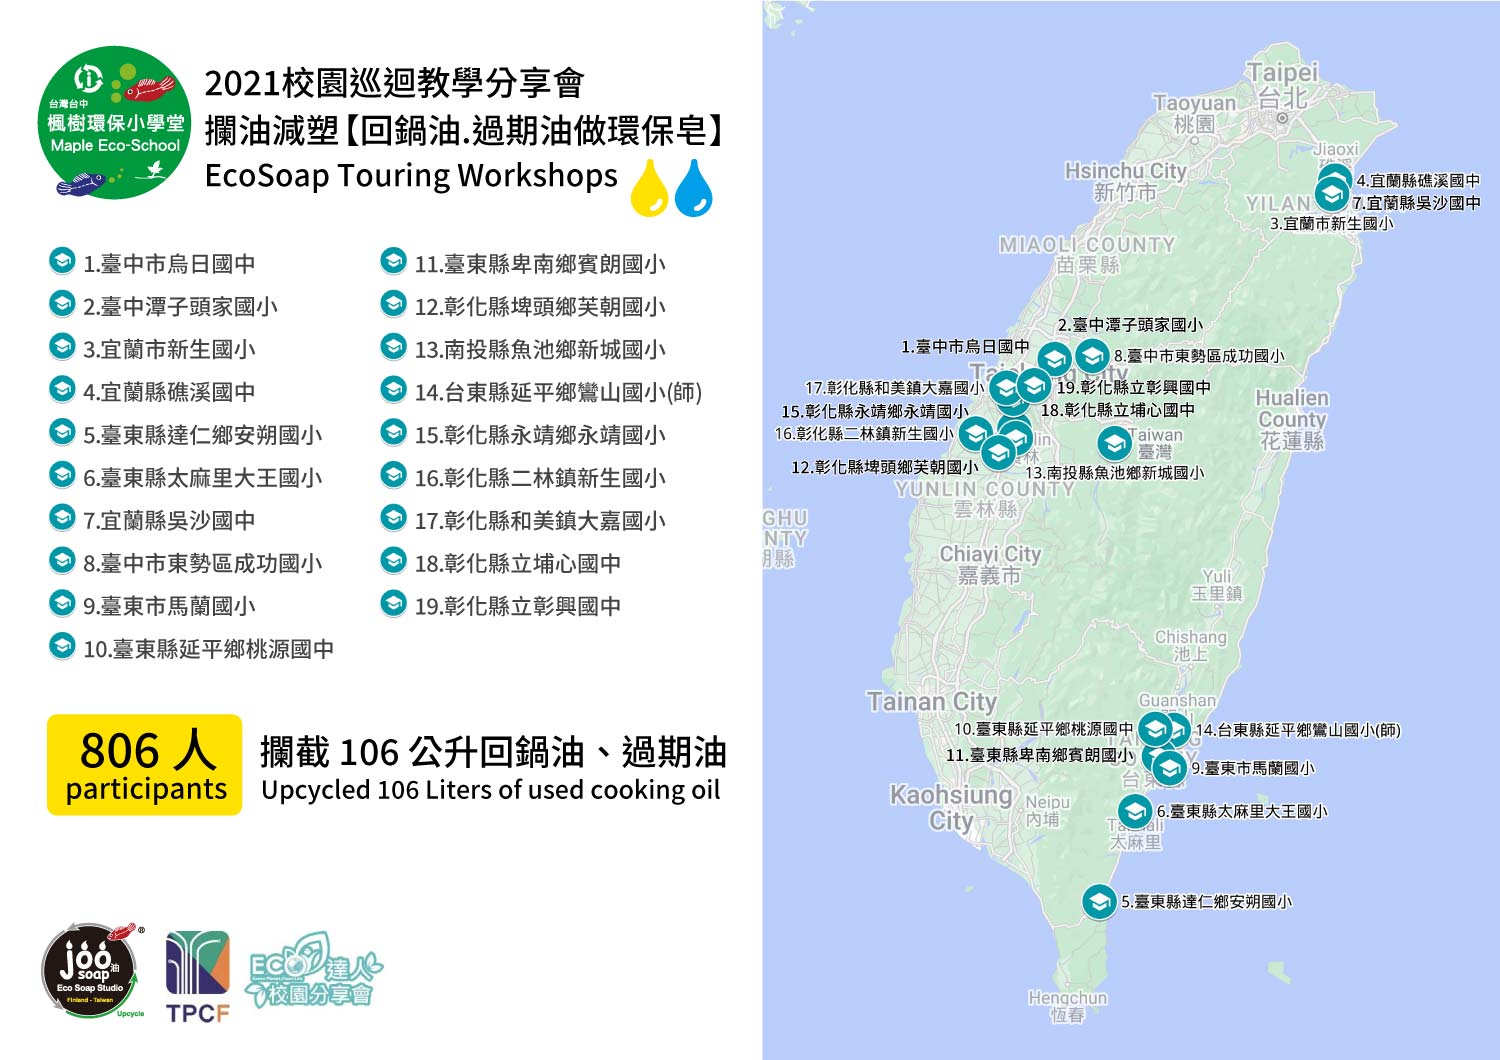 JooSoap Taiwan Maple-Eco-School completed 30 school touring workshops in 2021